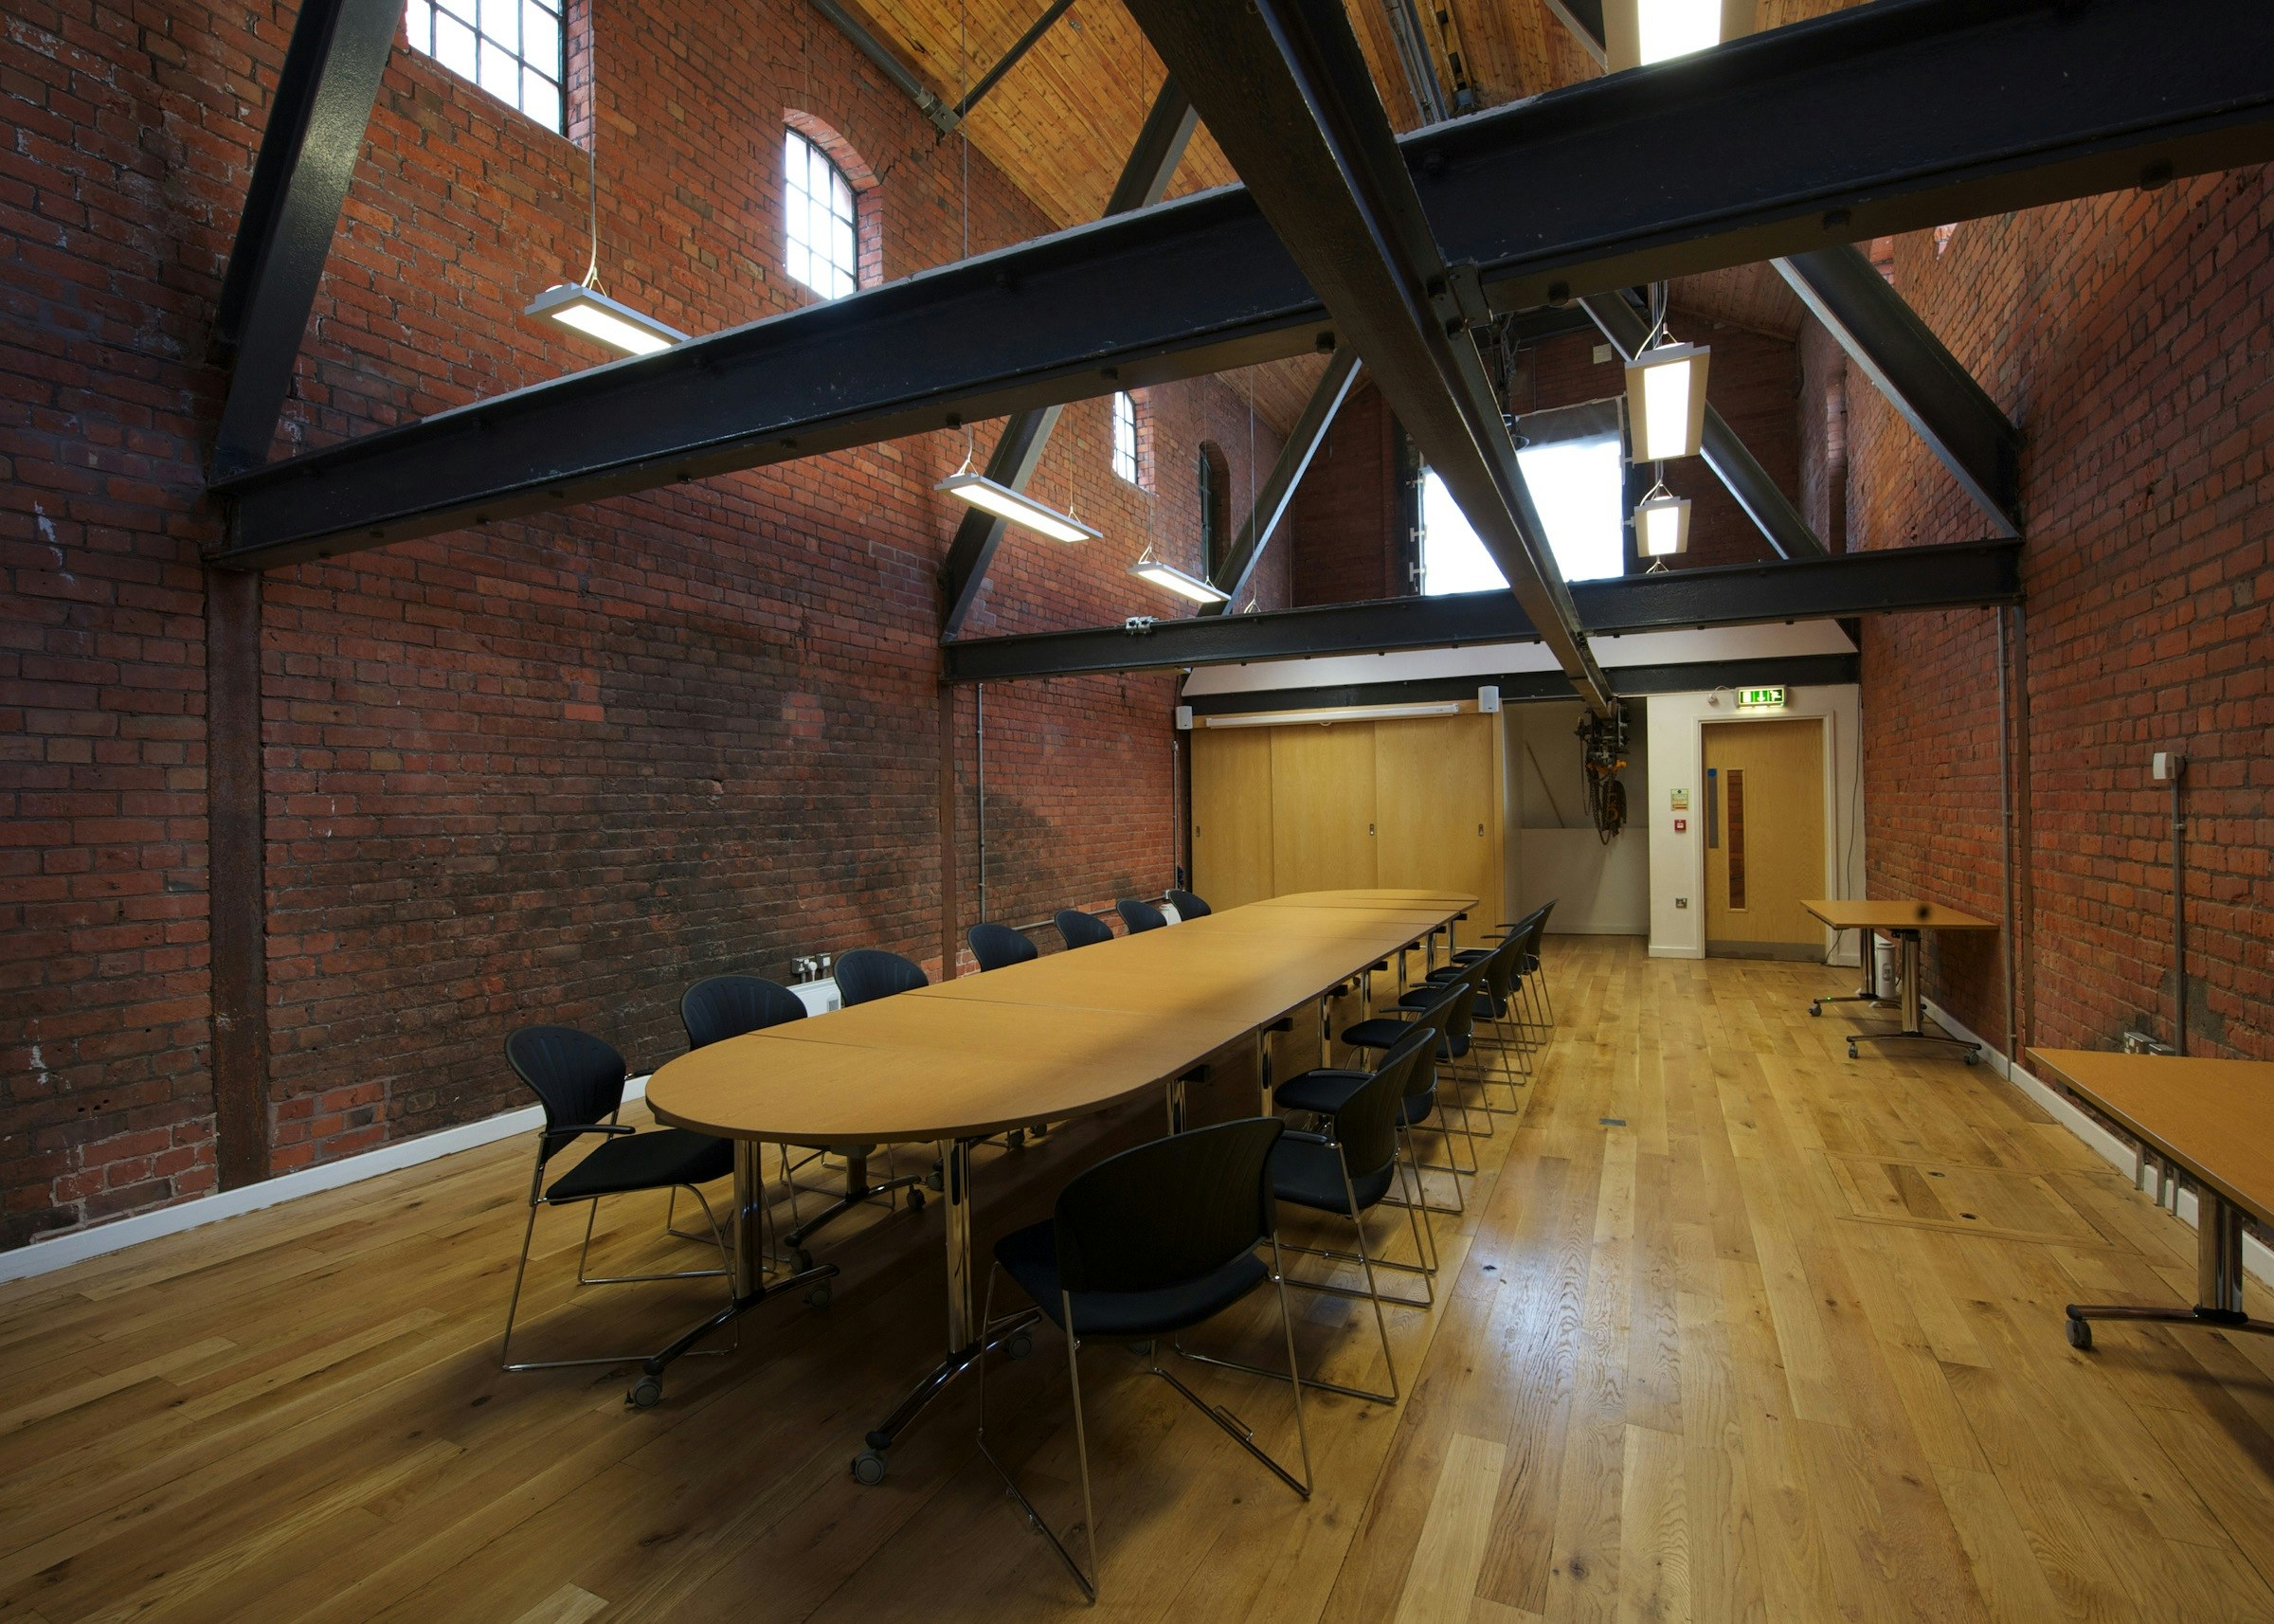 Workshop Venues in Manchester - People's History Museum